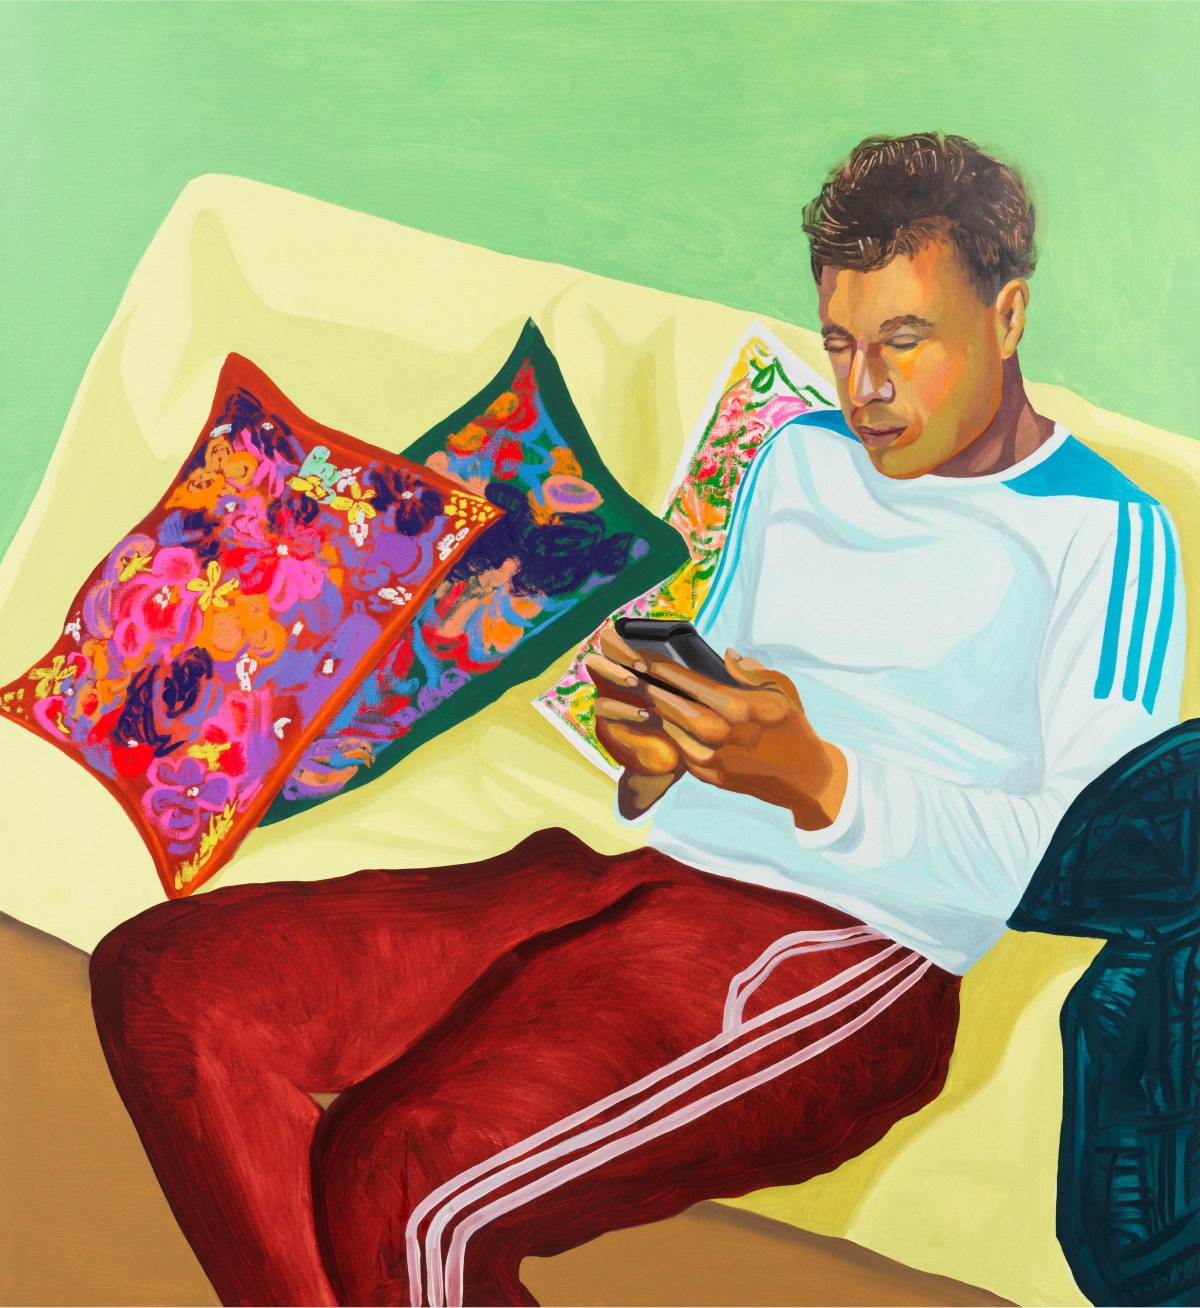 Artwork featuring a man seated on a yellow couch with colorfully printed pillows looking at his smartphone